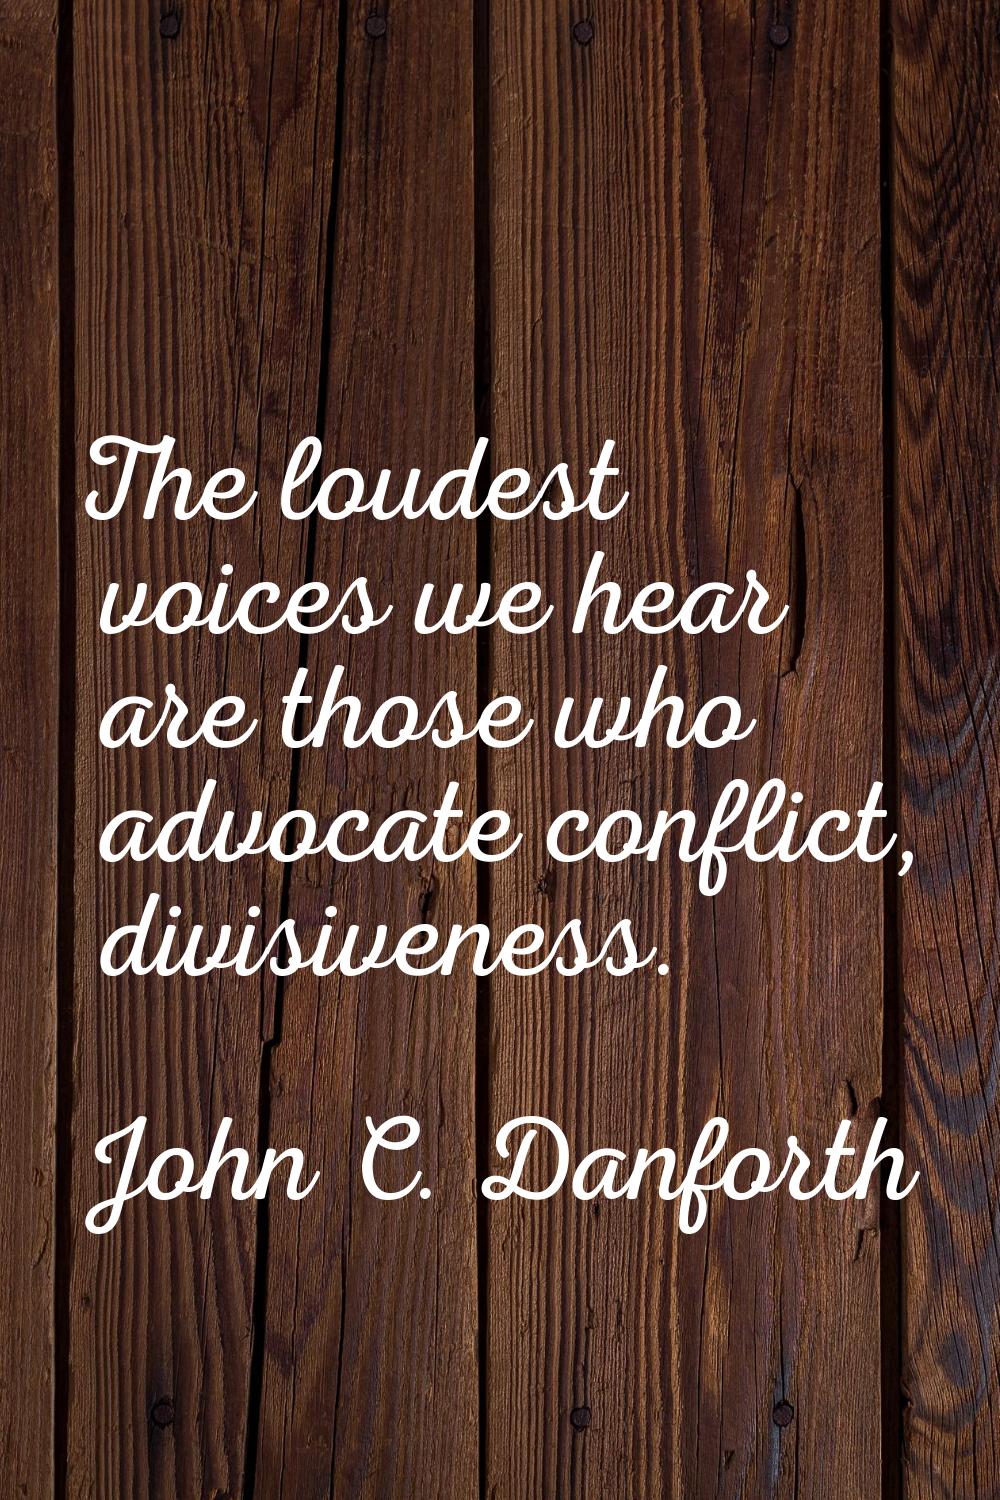 The loudest voices we hear are those who advocate conflict, divisiveness.